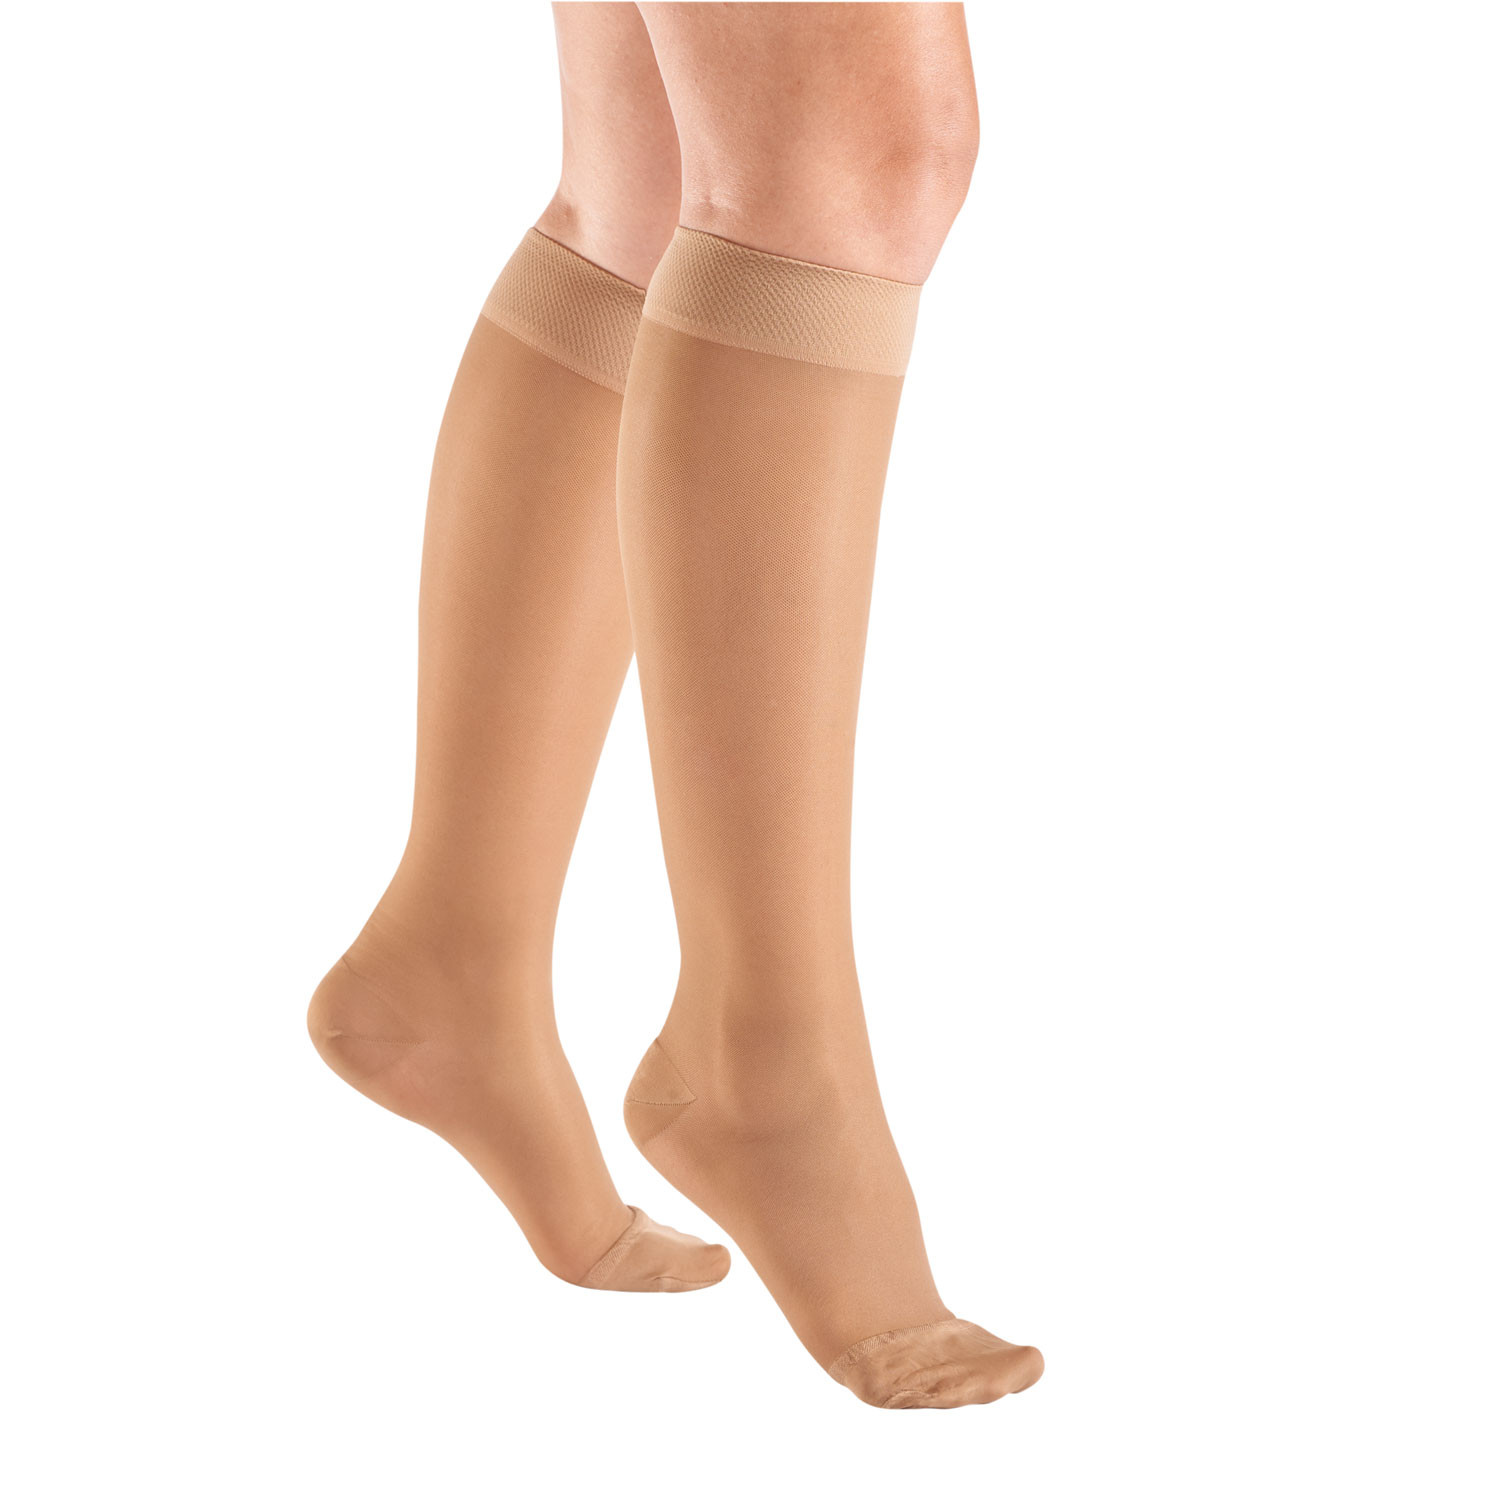 Support Plus® Women S Sheer Closed Toe Moderate Compression Knee High Stockings 49 Reviews 4